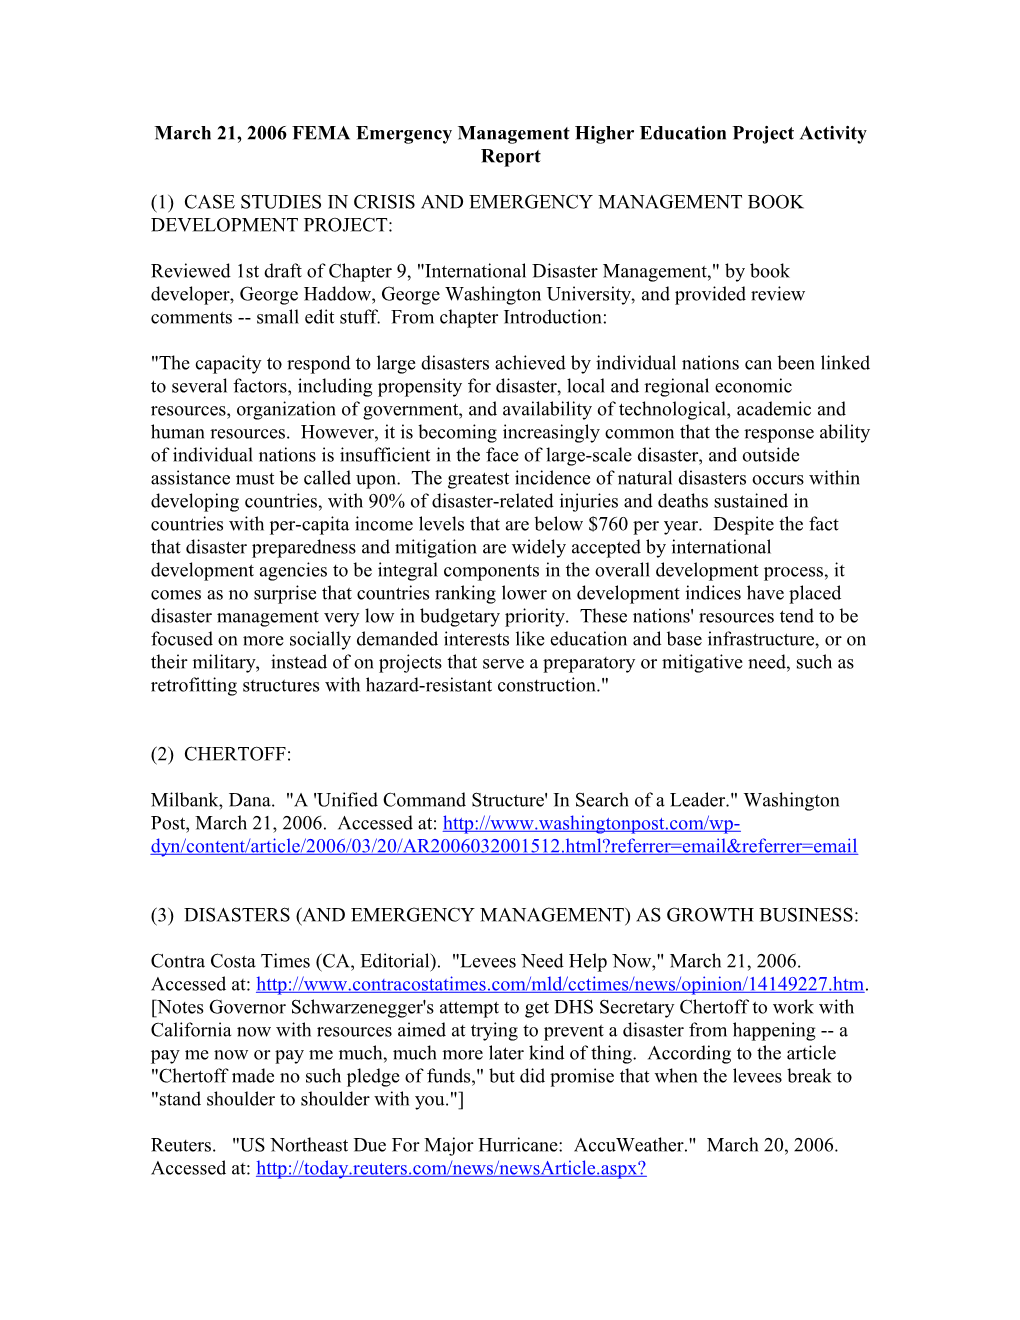 March 21, 2006 FEMA Emergency Management Higher Education Project Activity Report